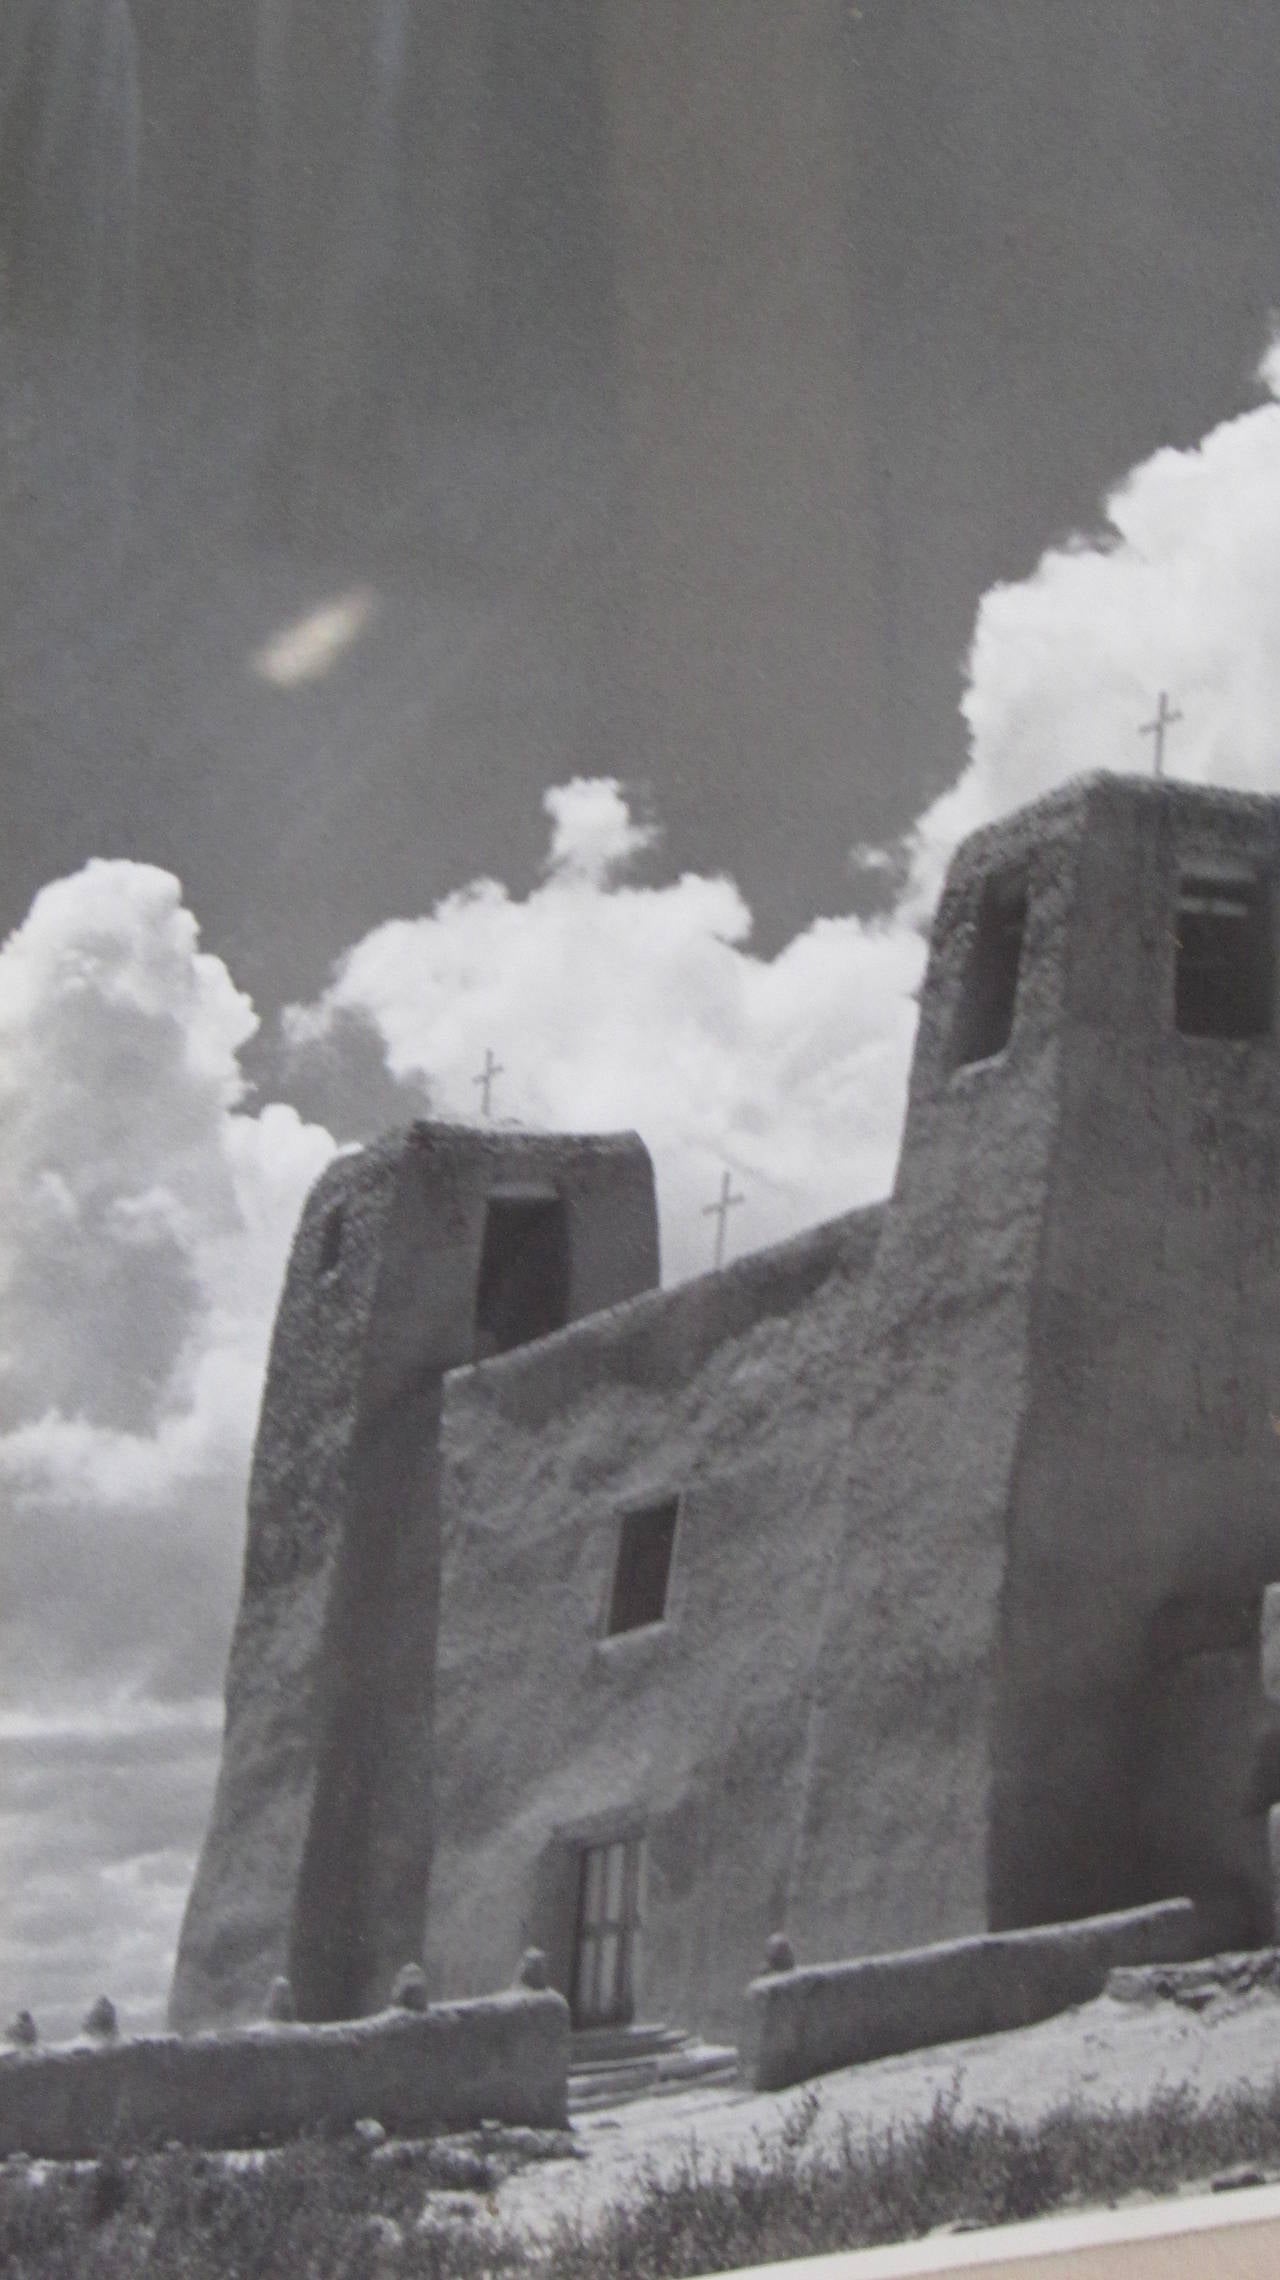 20th Century Vintage New Mexico Stark Landscape Photograph with Mission Church